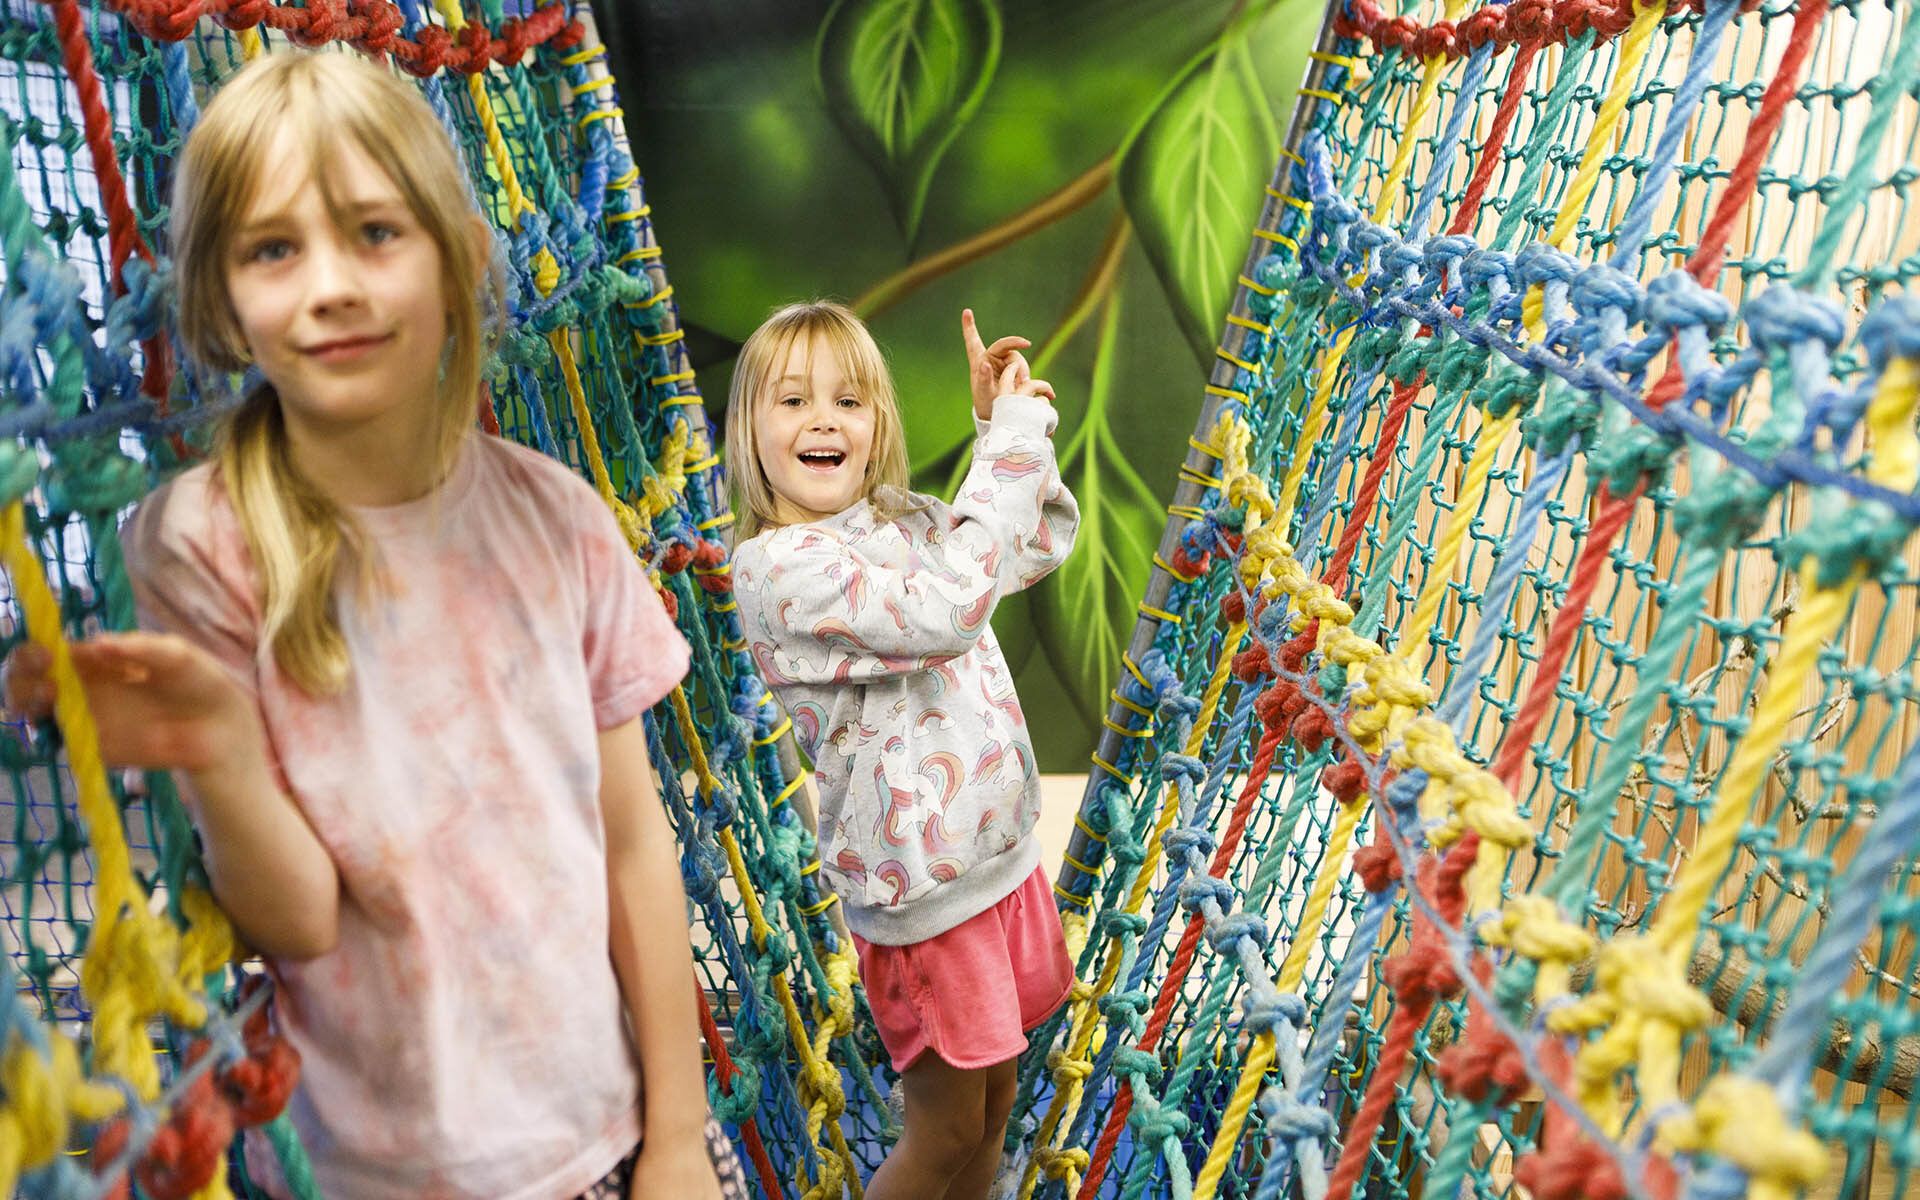 WiLD THiNGS Play Project: Indoor play doesn’t have to be plastic to be fun!